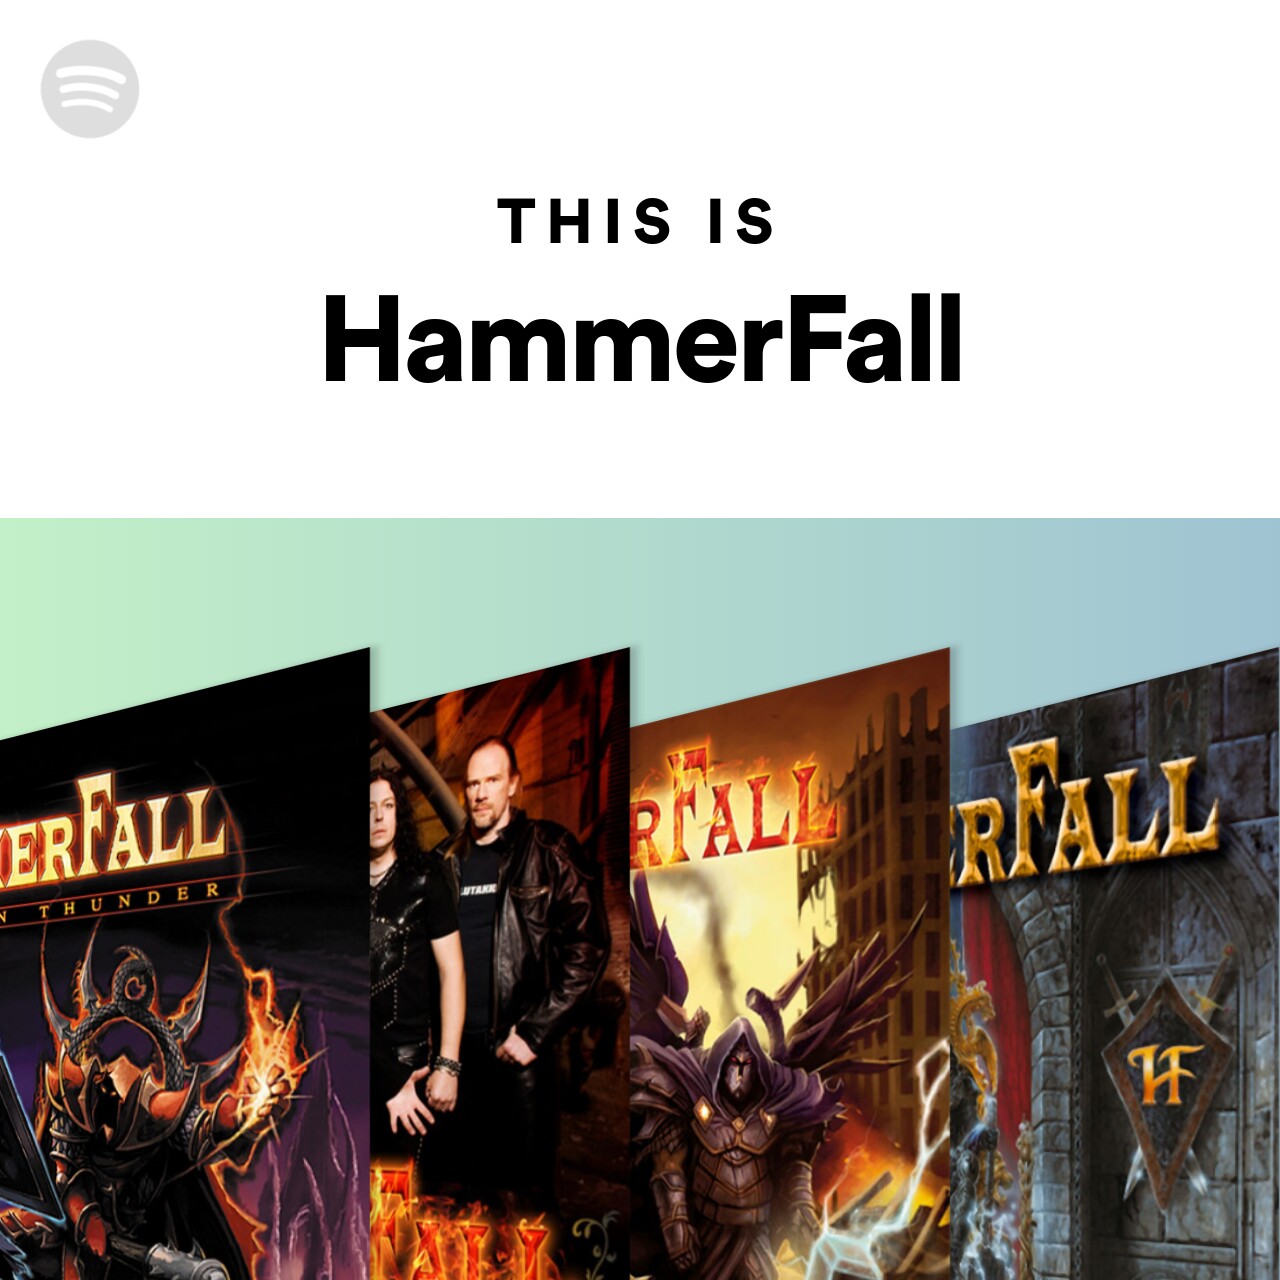 This Is HammerFall